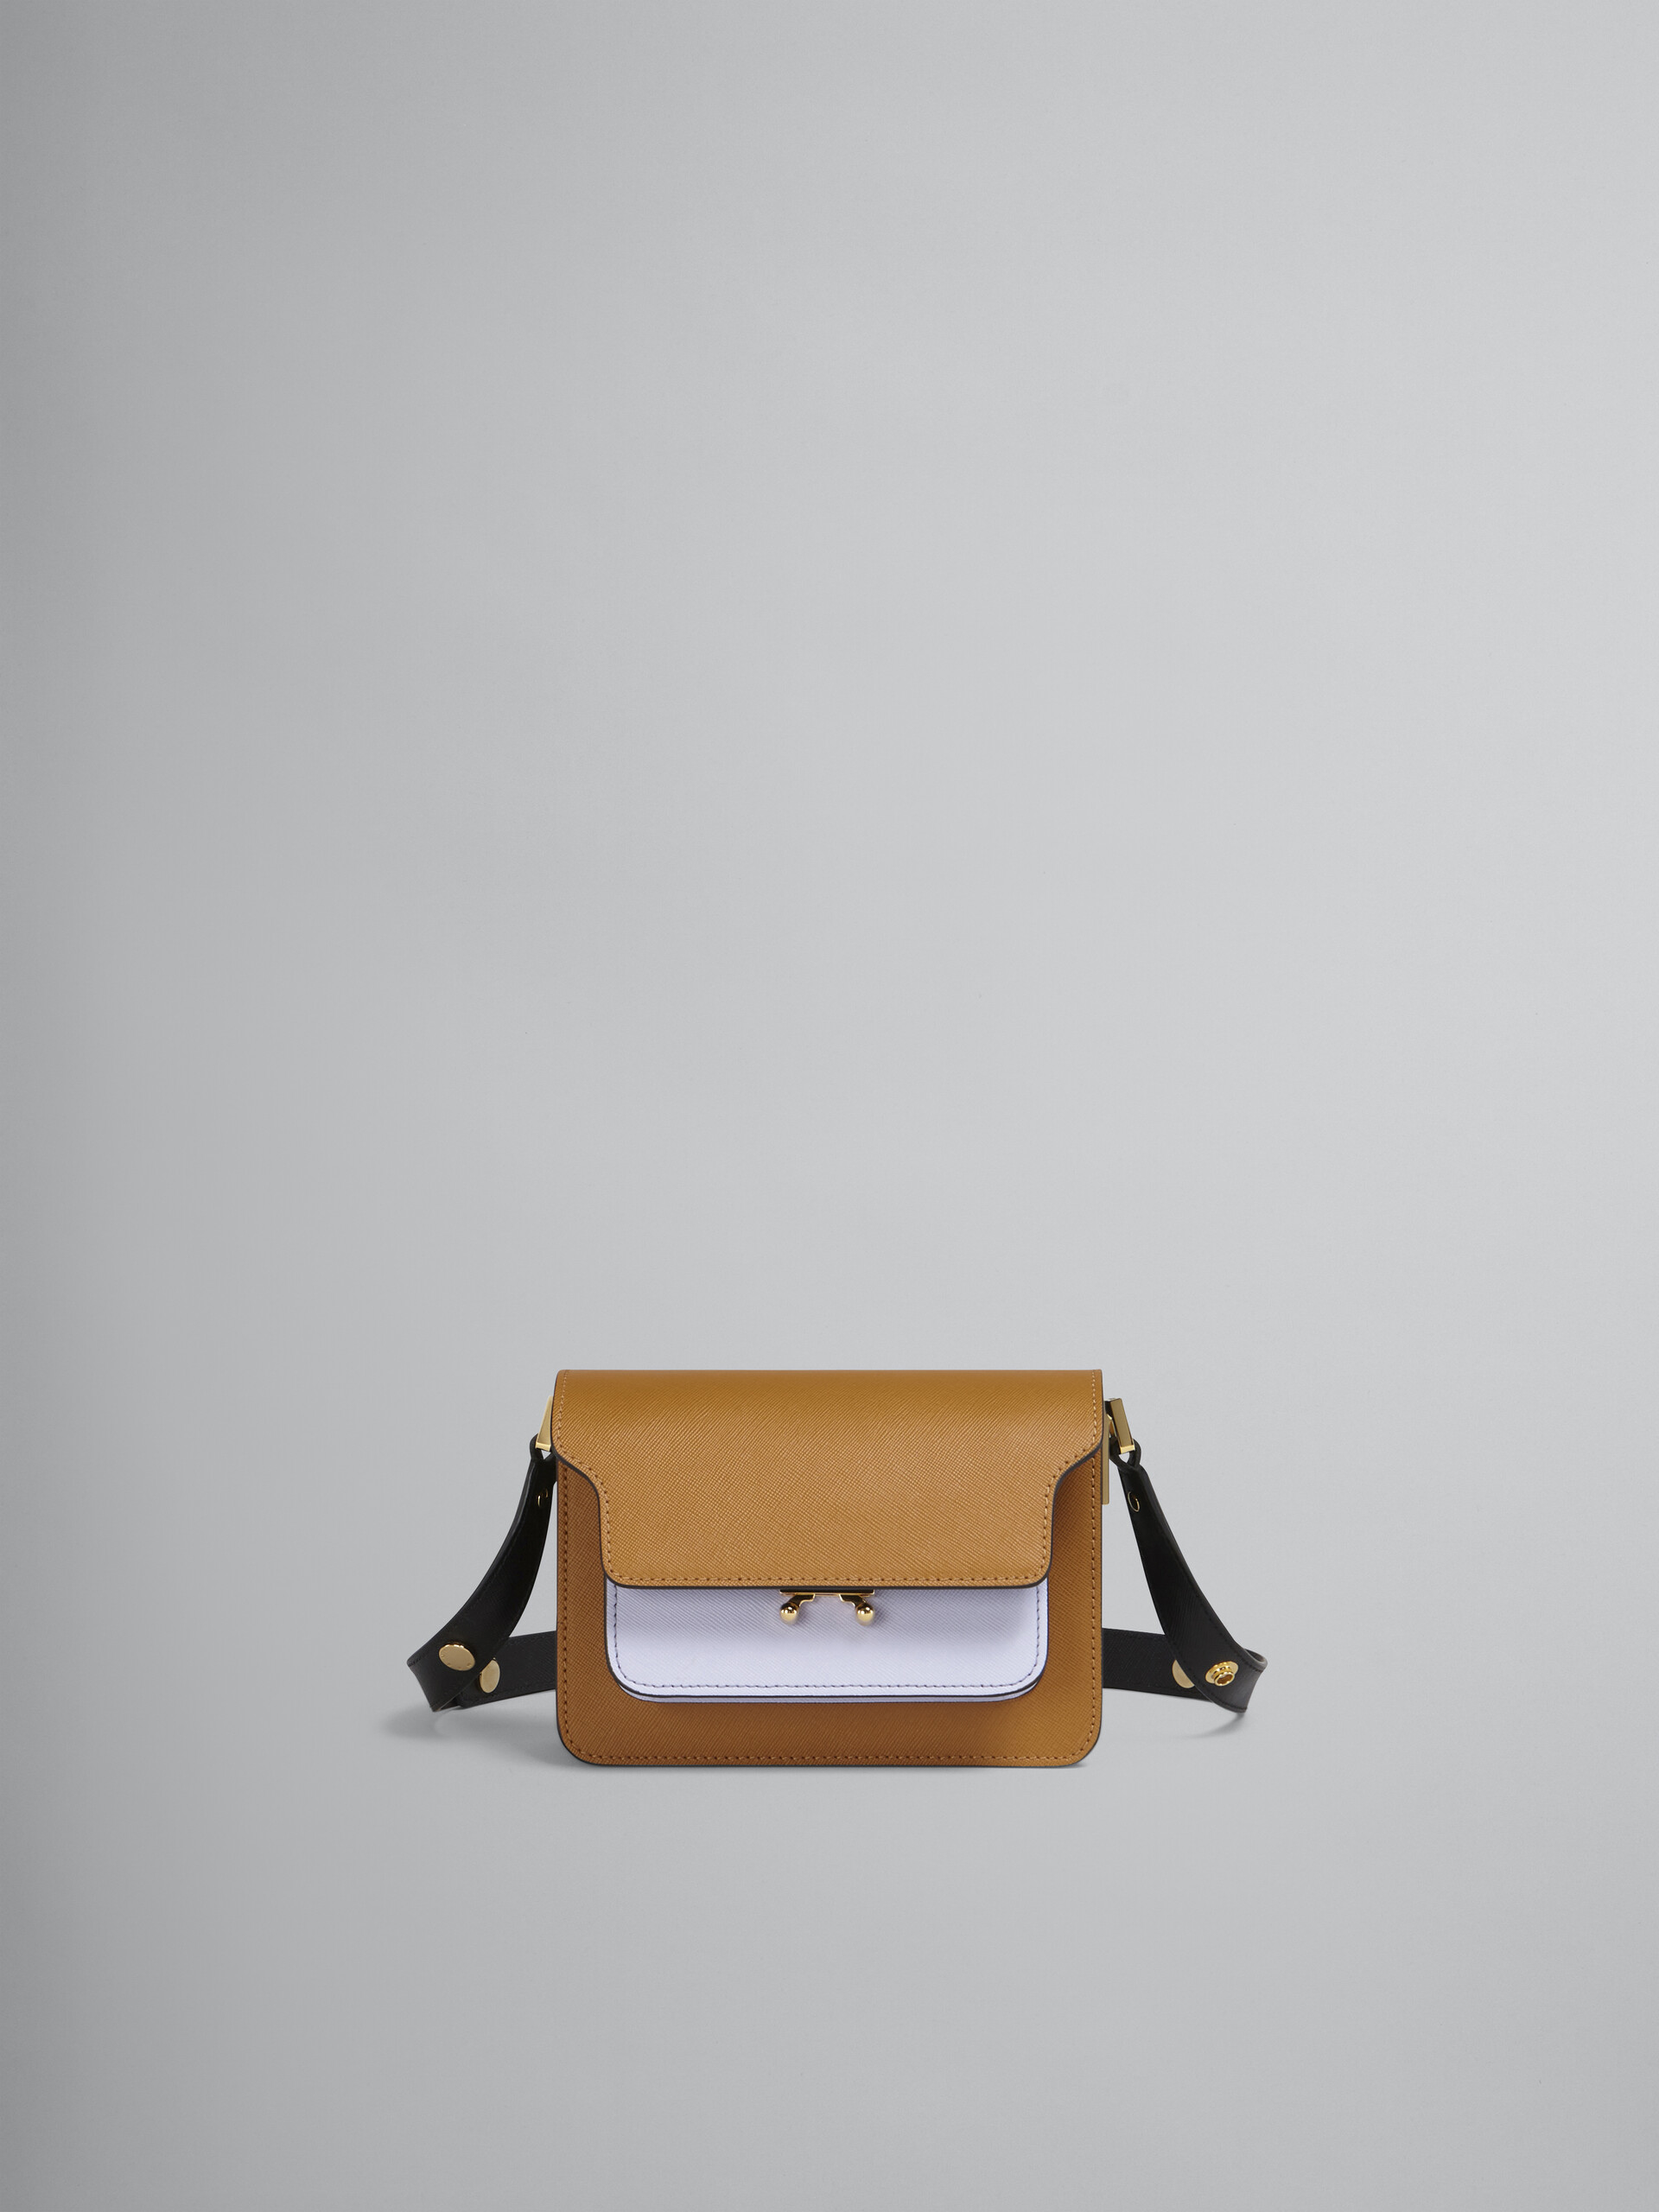 TRUNK mini bag in brown lilac and black saffiano leather - Shoulder Bags - Image 1